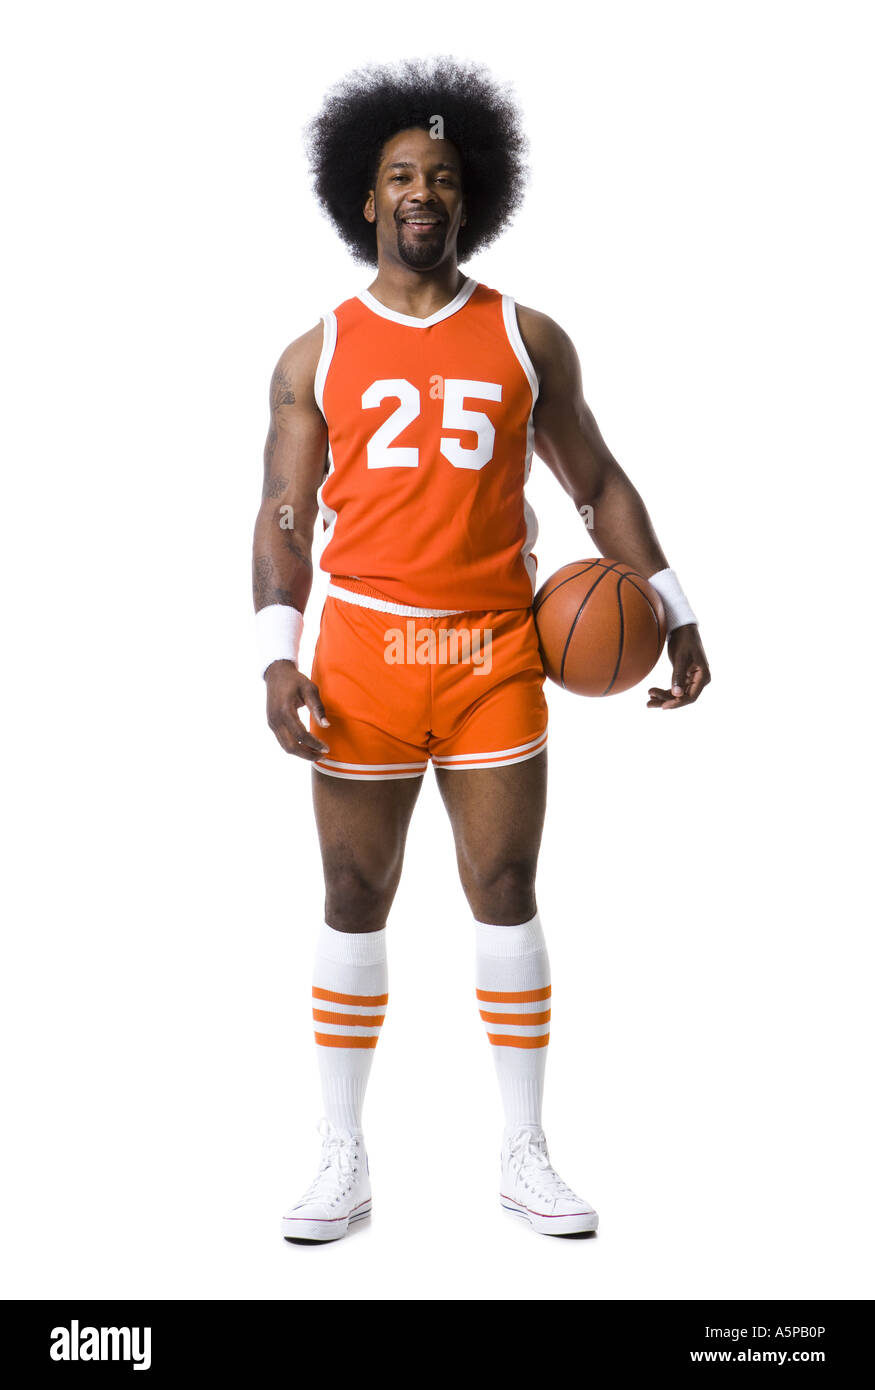 Basketball player with an afro in orange uniform Stock Photo - Alamy